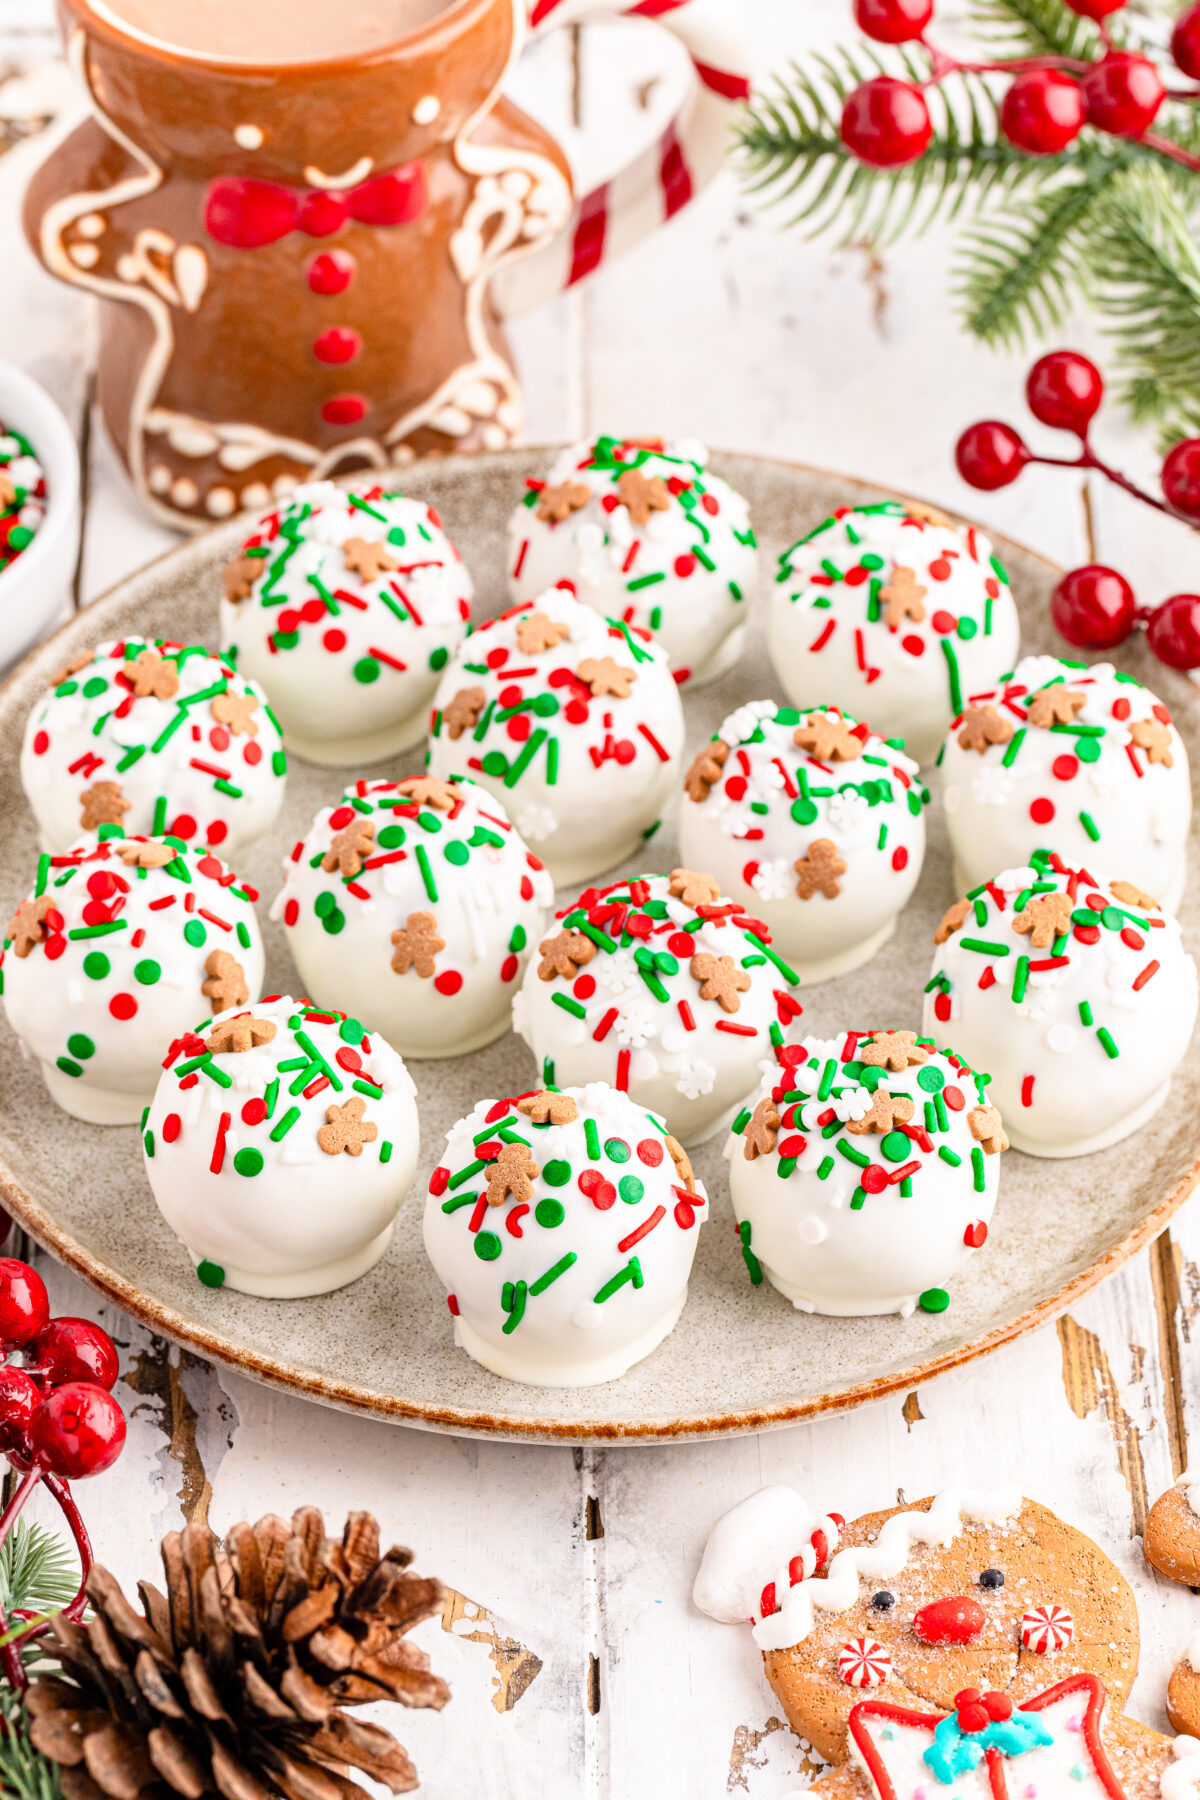 Looking to make a festive holiday treat? Check out our recipe for gingerbread cake balls - they're so easy and sure to be a hit!